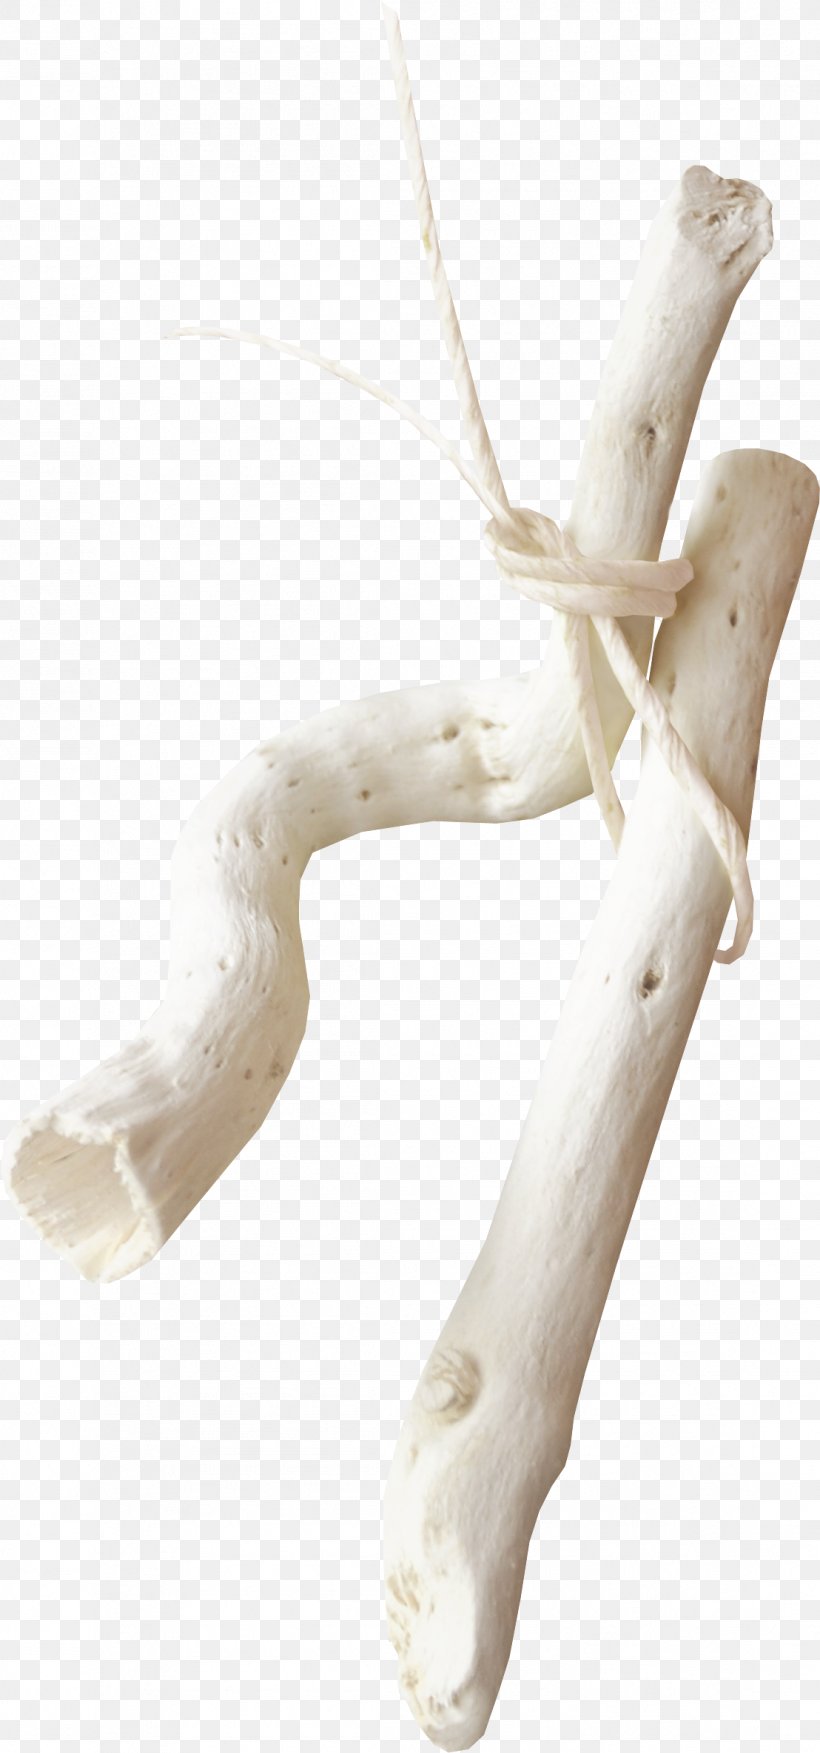 Wood Download Google Images, PNG, 1108x2369px, Wood, Arm, Bone, Branch, Cartoon Download Free